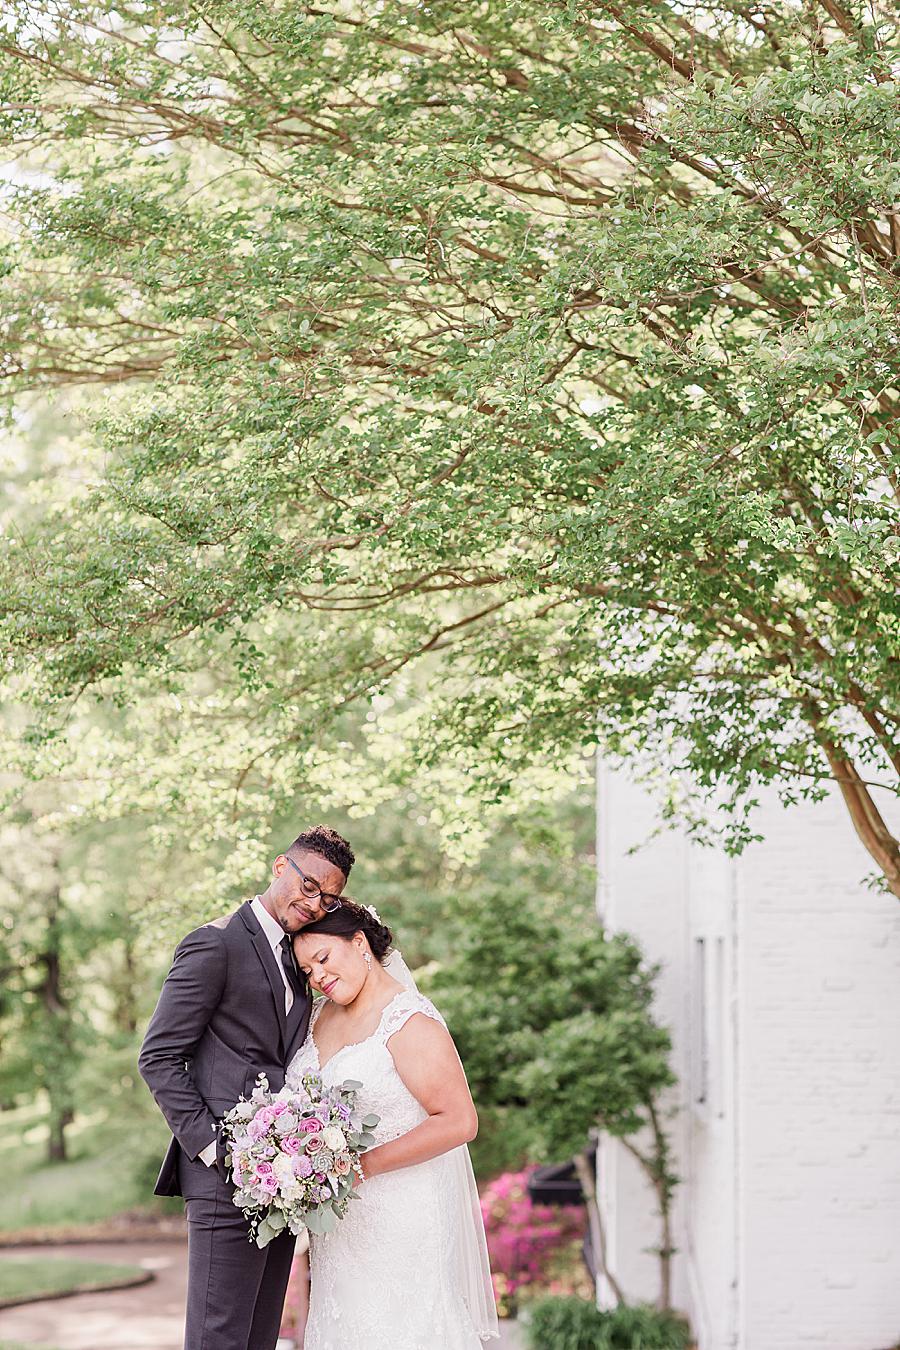 Heads together at this Holston Hills Country Club wedding by Knoxville Wedding Photographer, Amanda May Photos.